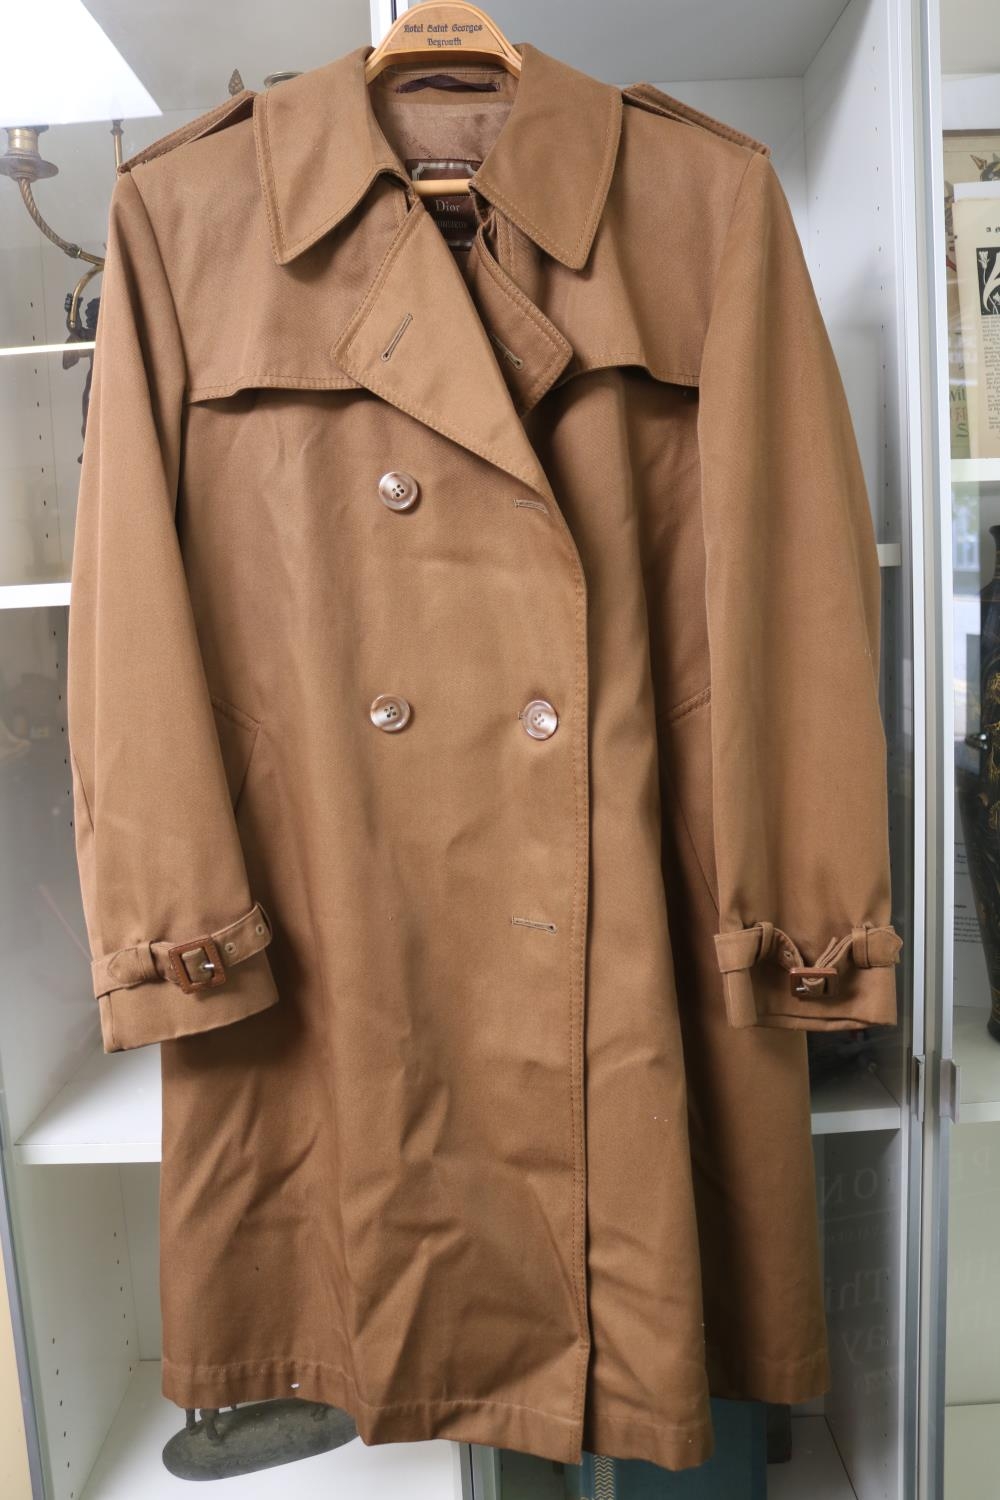 Christian Dior Monsieur Brown Trench Coat Mac retailed by Stoffels Small to medium size - Image 2 of 4